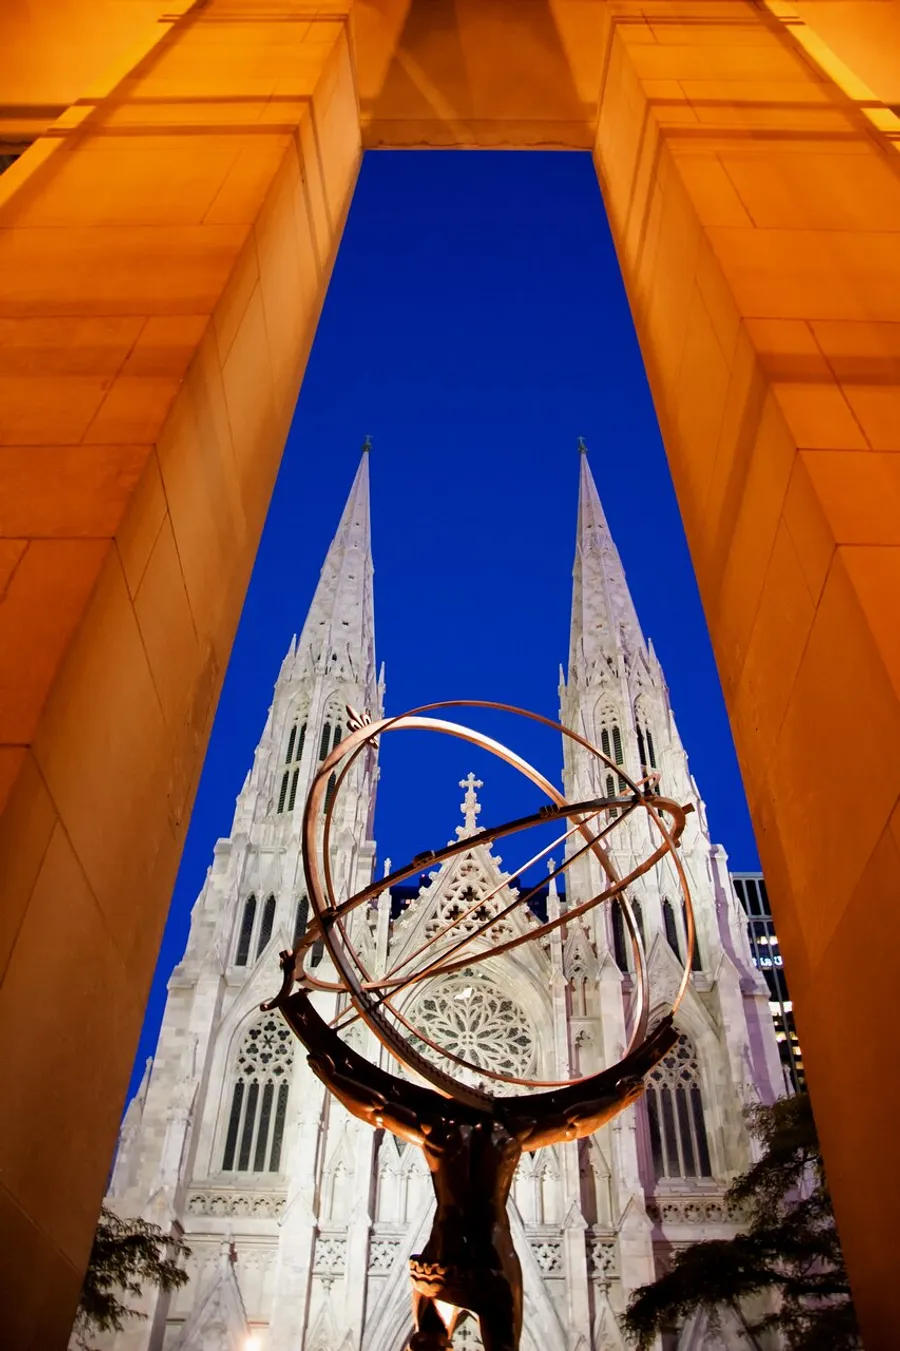 The image shows the towering spires of a Gothic cathedral framed by a dramatic archway and contrasted with a modern sculpture in the foreground against a deep blue sky.